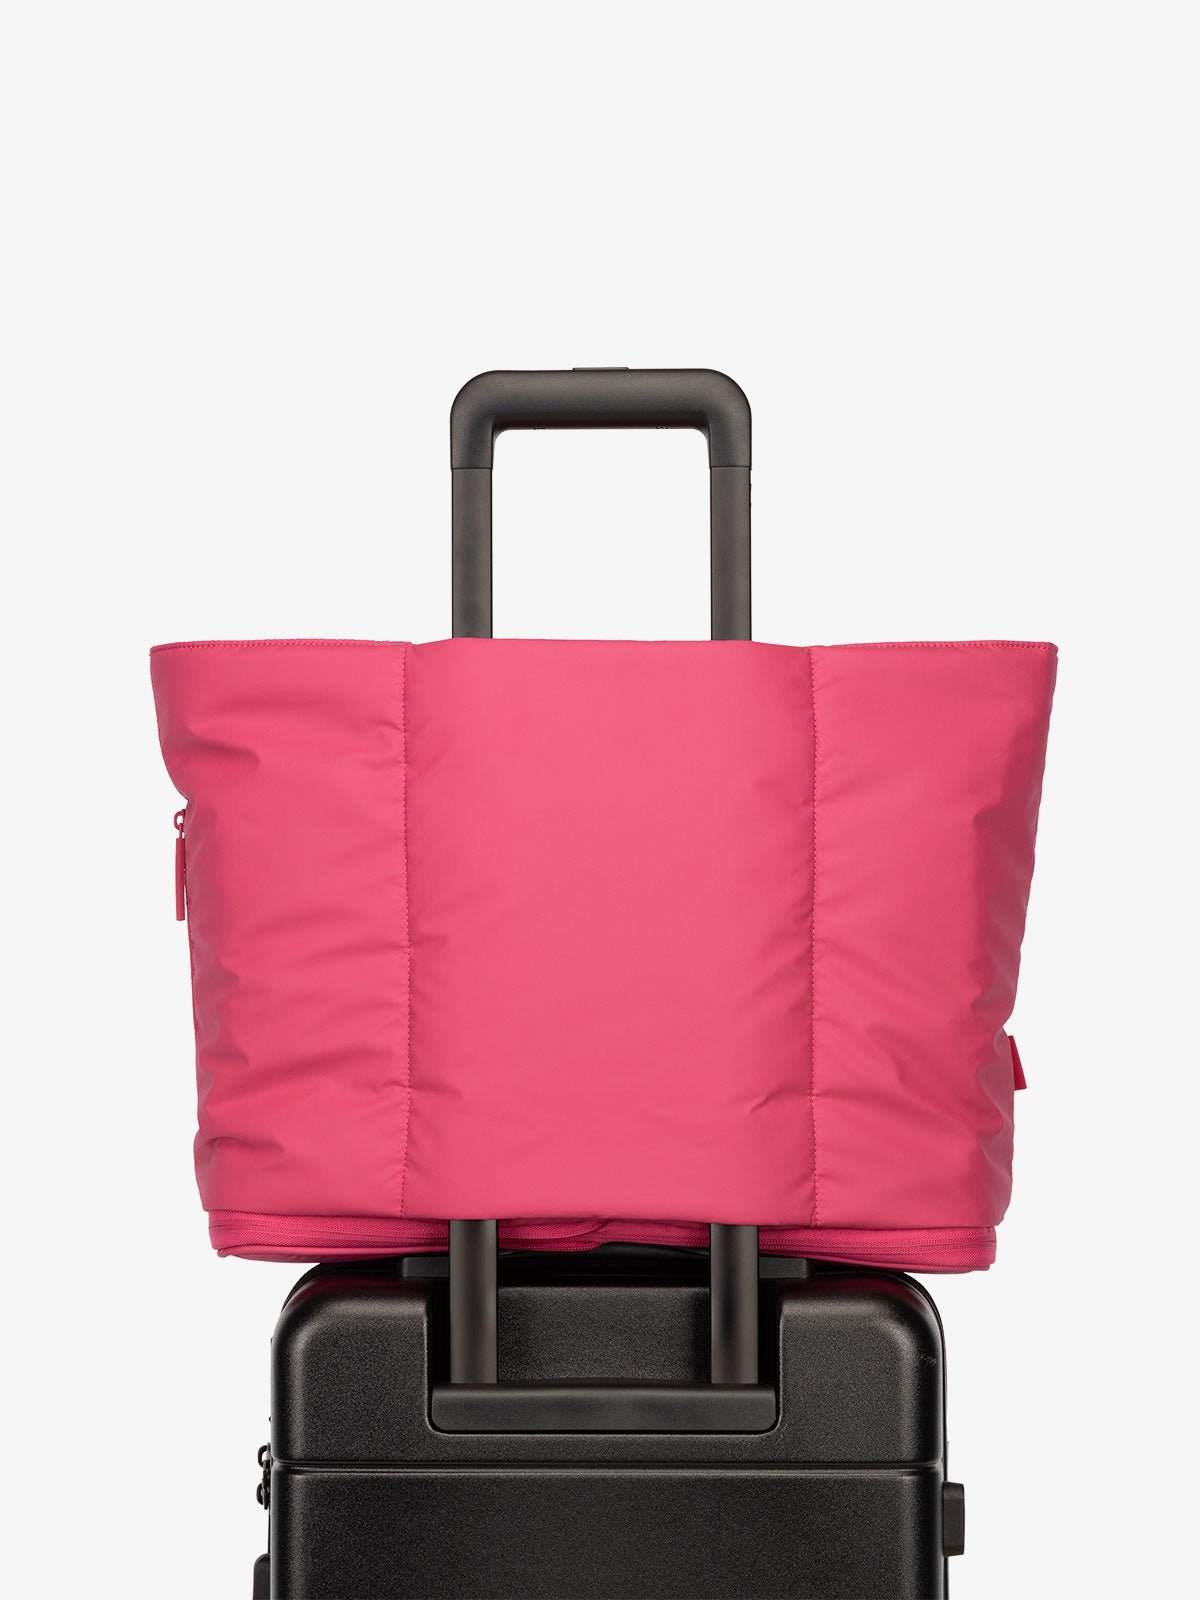 CALPAK Luka expandable travel bag with laptop compartment and trolley sleeve in pink dragonfruit